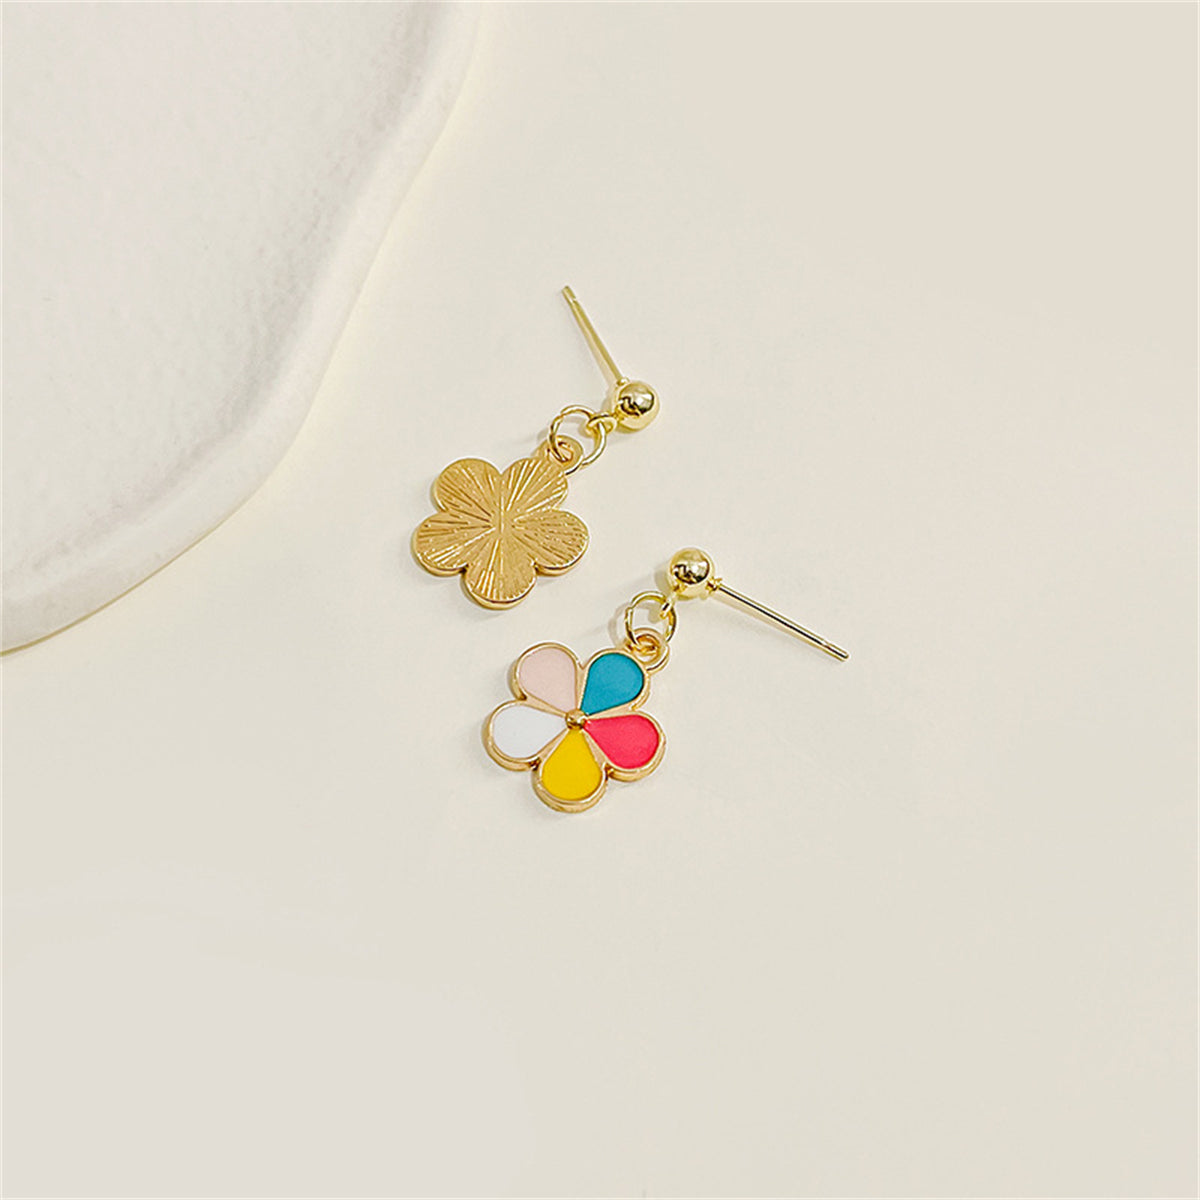 Pastel & 18K Gold-Plated Floral Drop Earrings